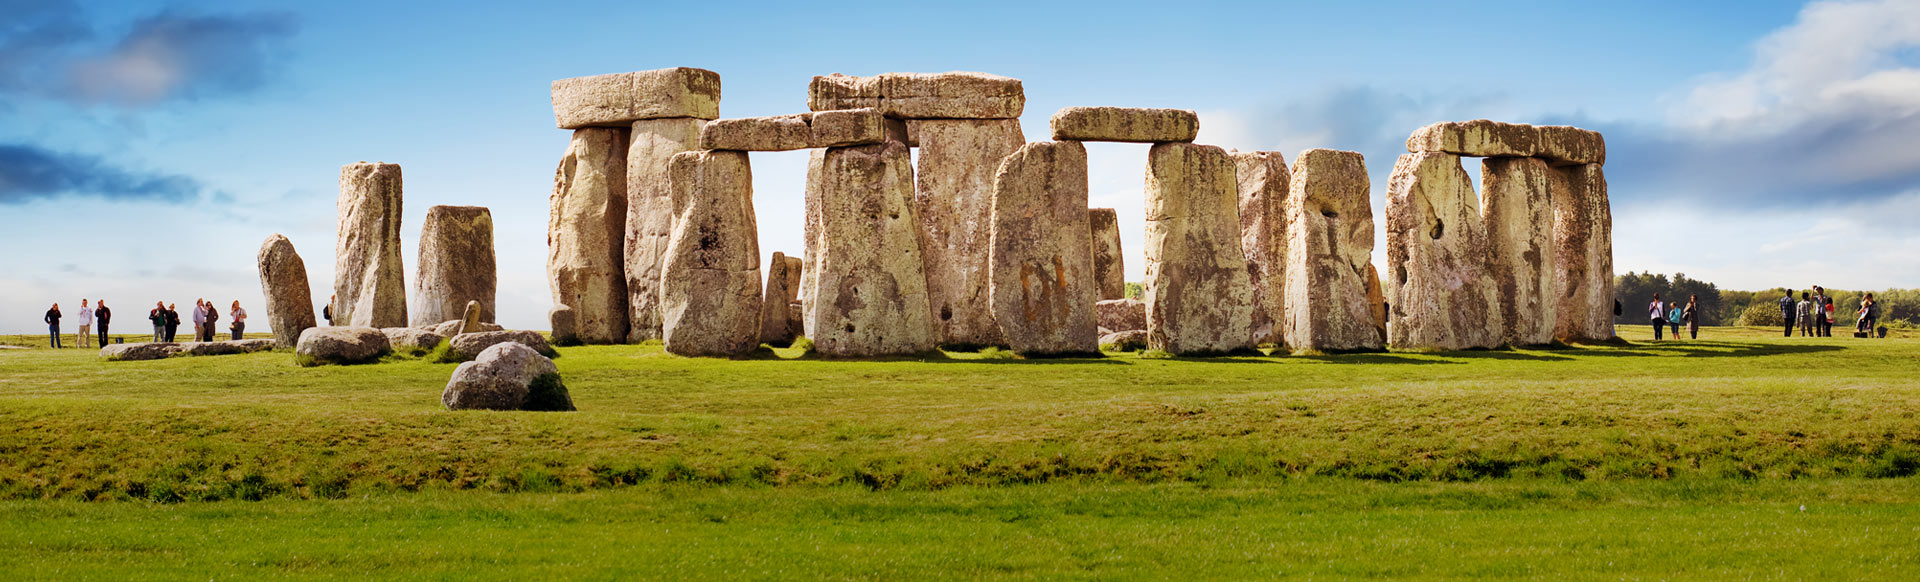 Stonehenge, one of the best day trips from London.